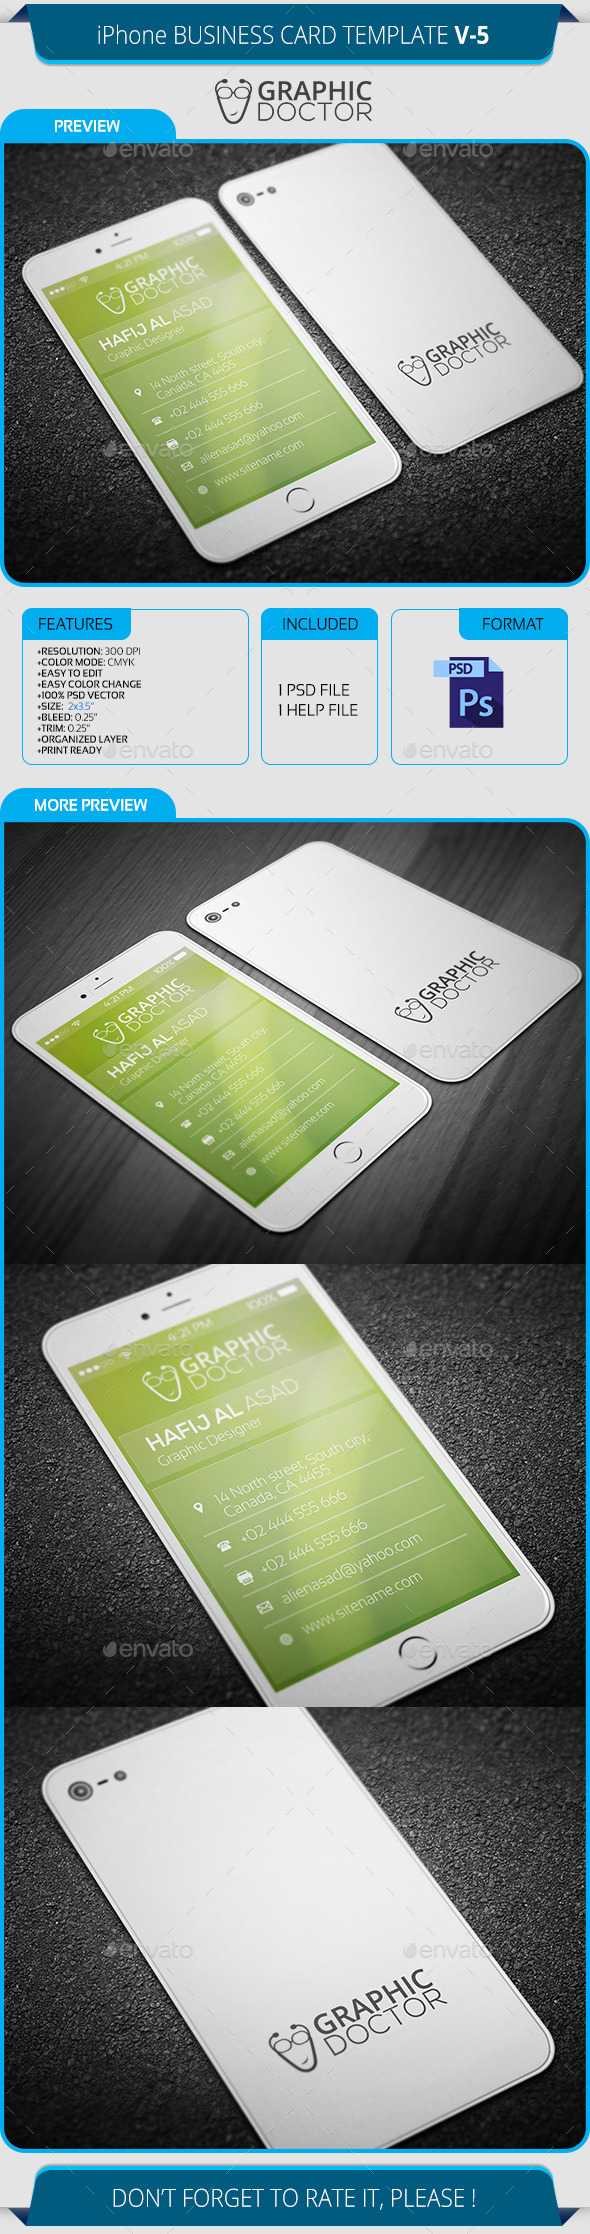 Iphone Business Card Template V 5 With Regard To Iphone Business Card Template